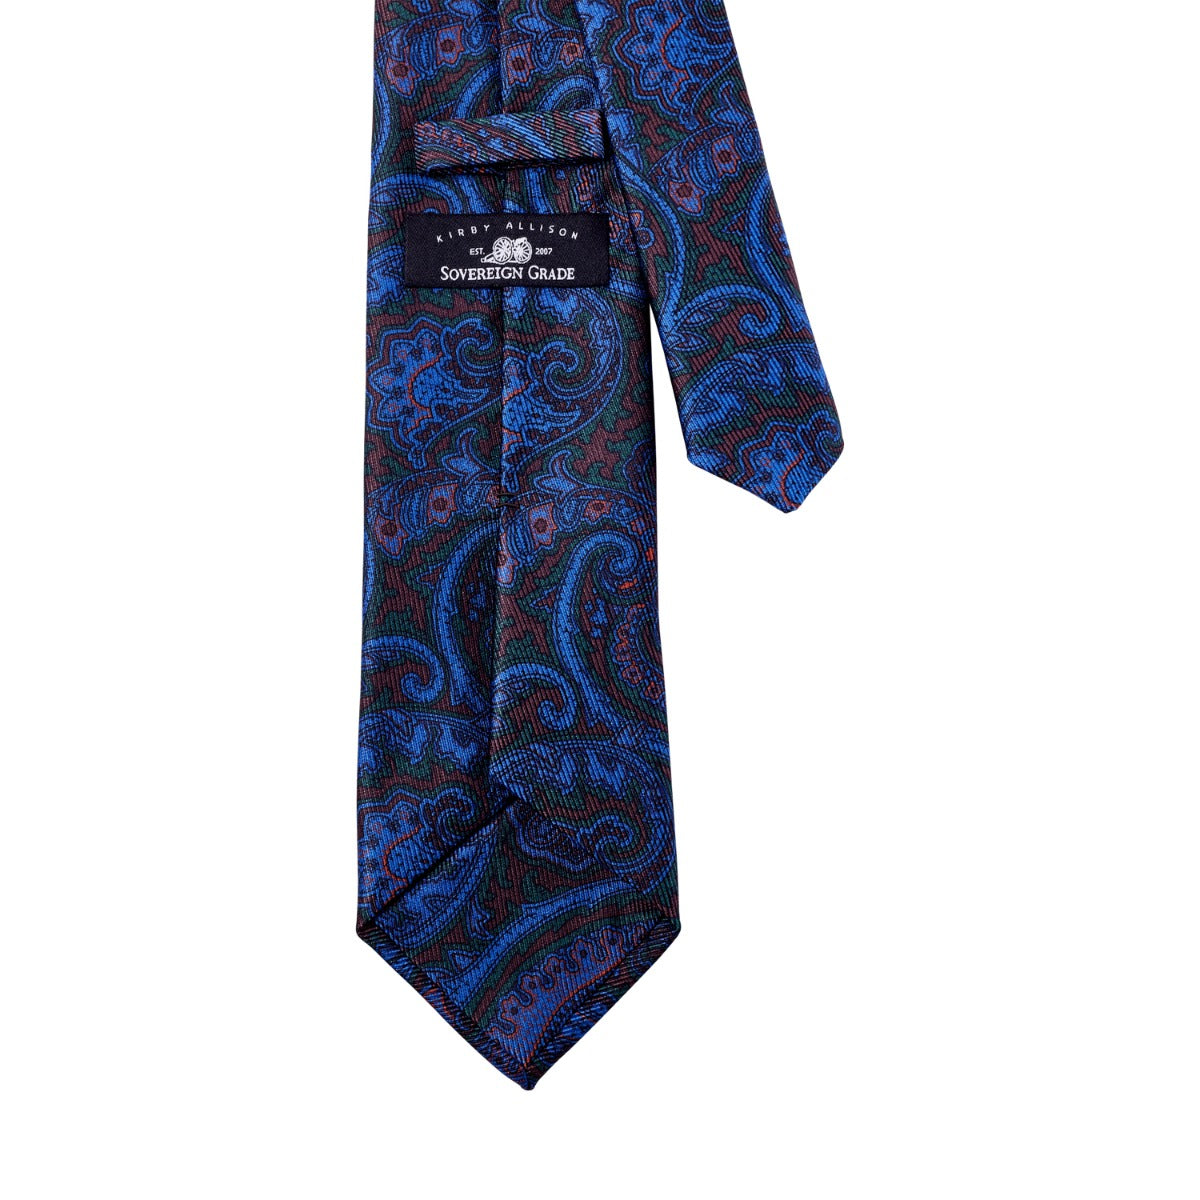 A Sovereign Grade Navy and Brown Paisley Ancient Madder Silk Tie from KirbyAllison.com on a white background.